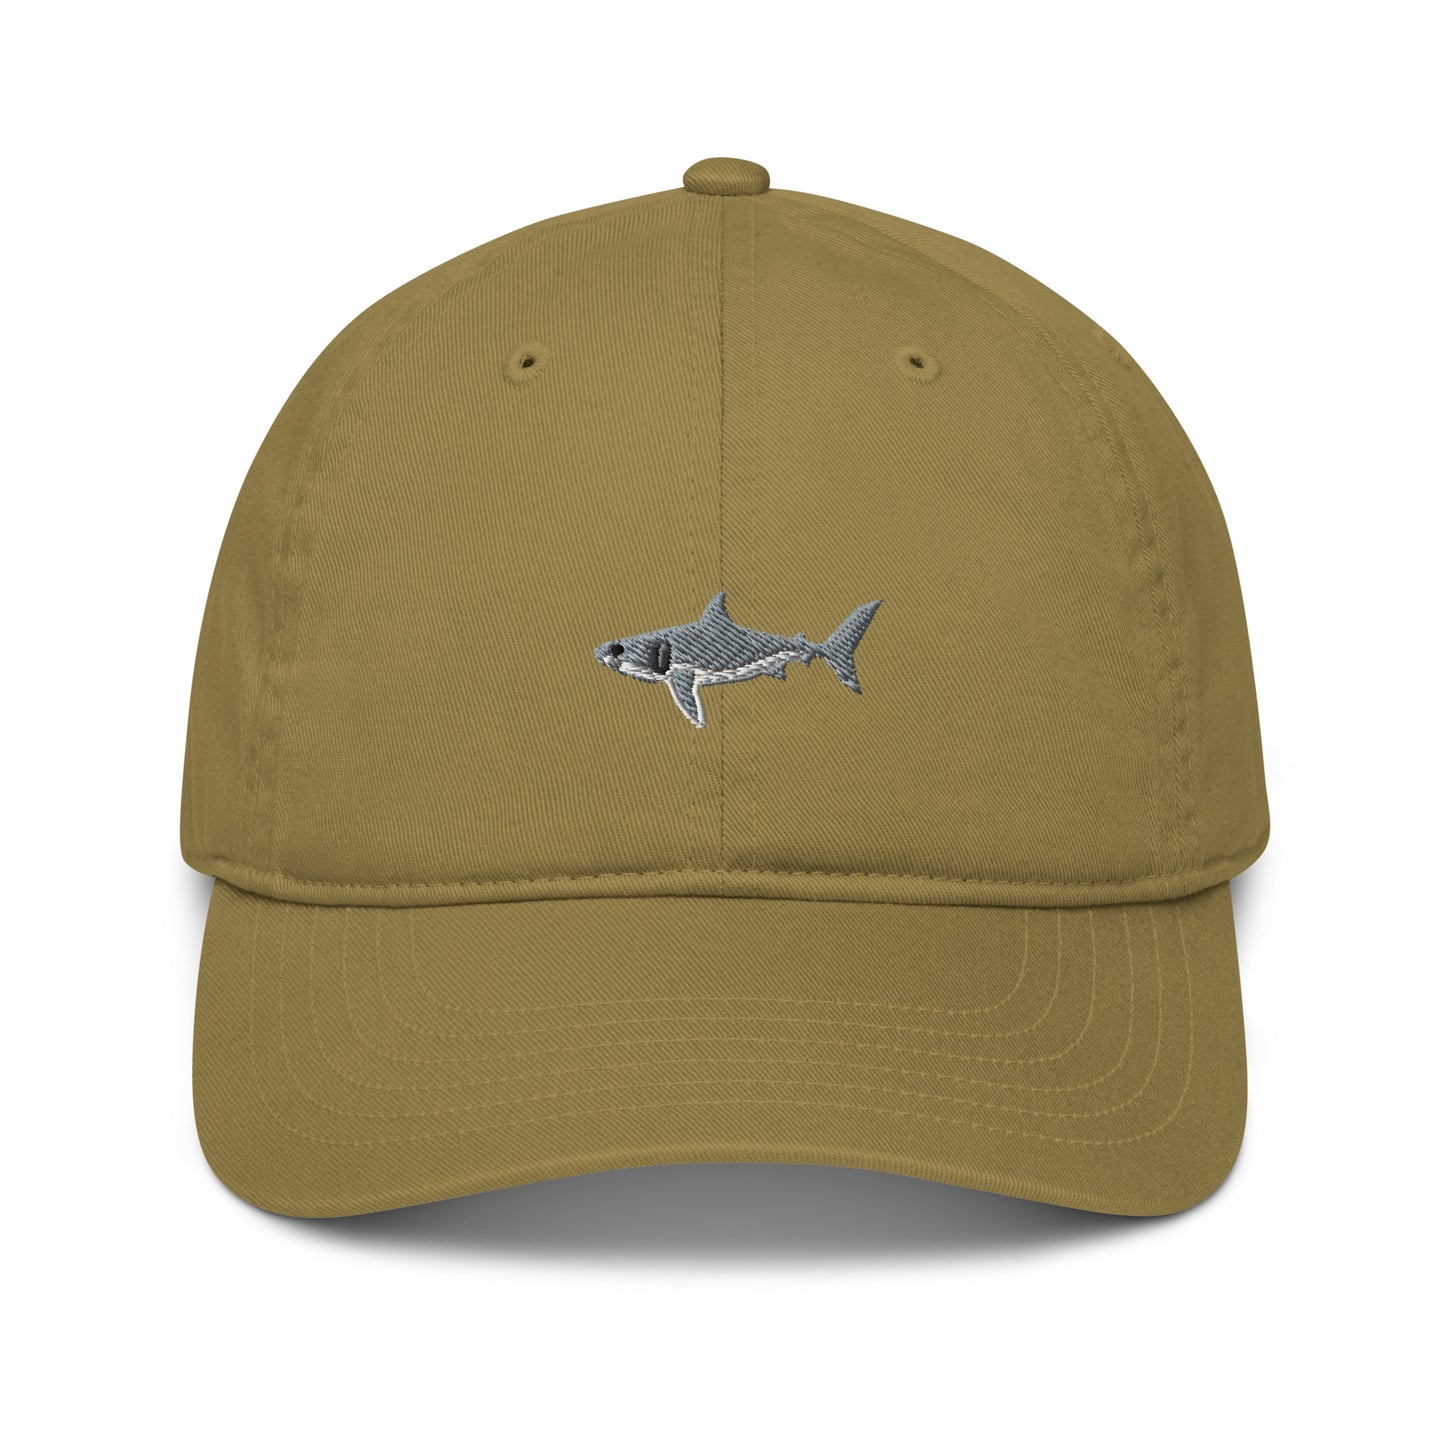 Great White Classic Hat